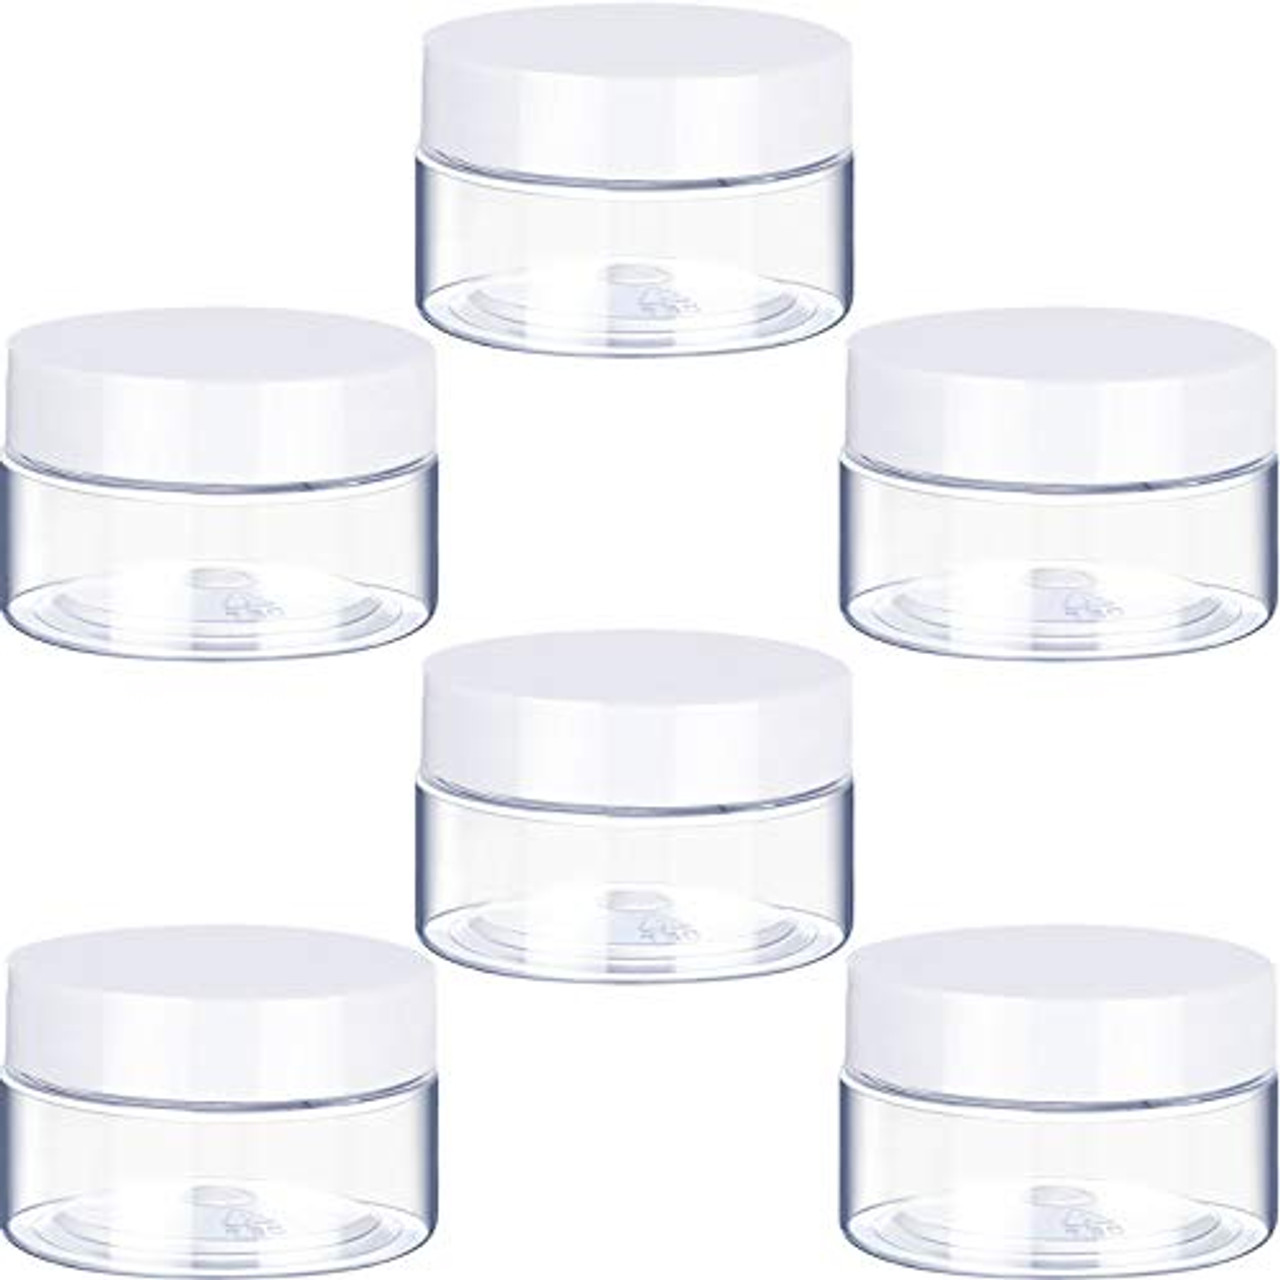 24 Pack Small Glass Containers with Lids 1 oz, Empty Jars with 6